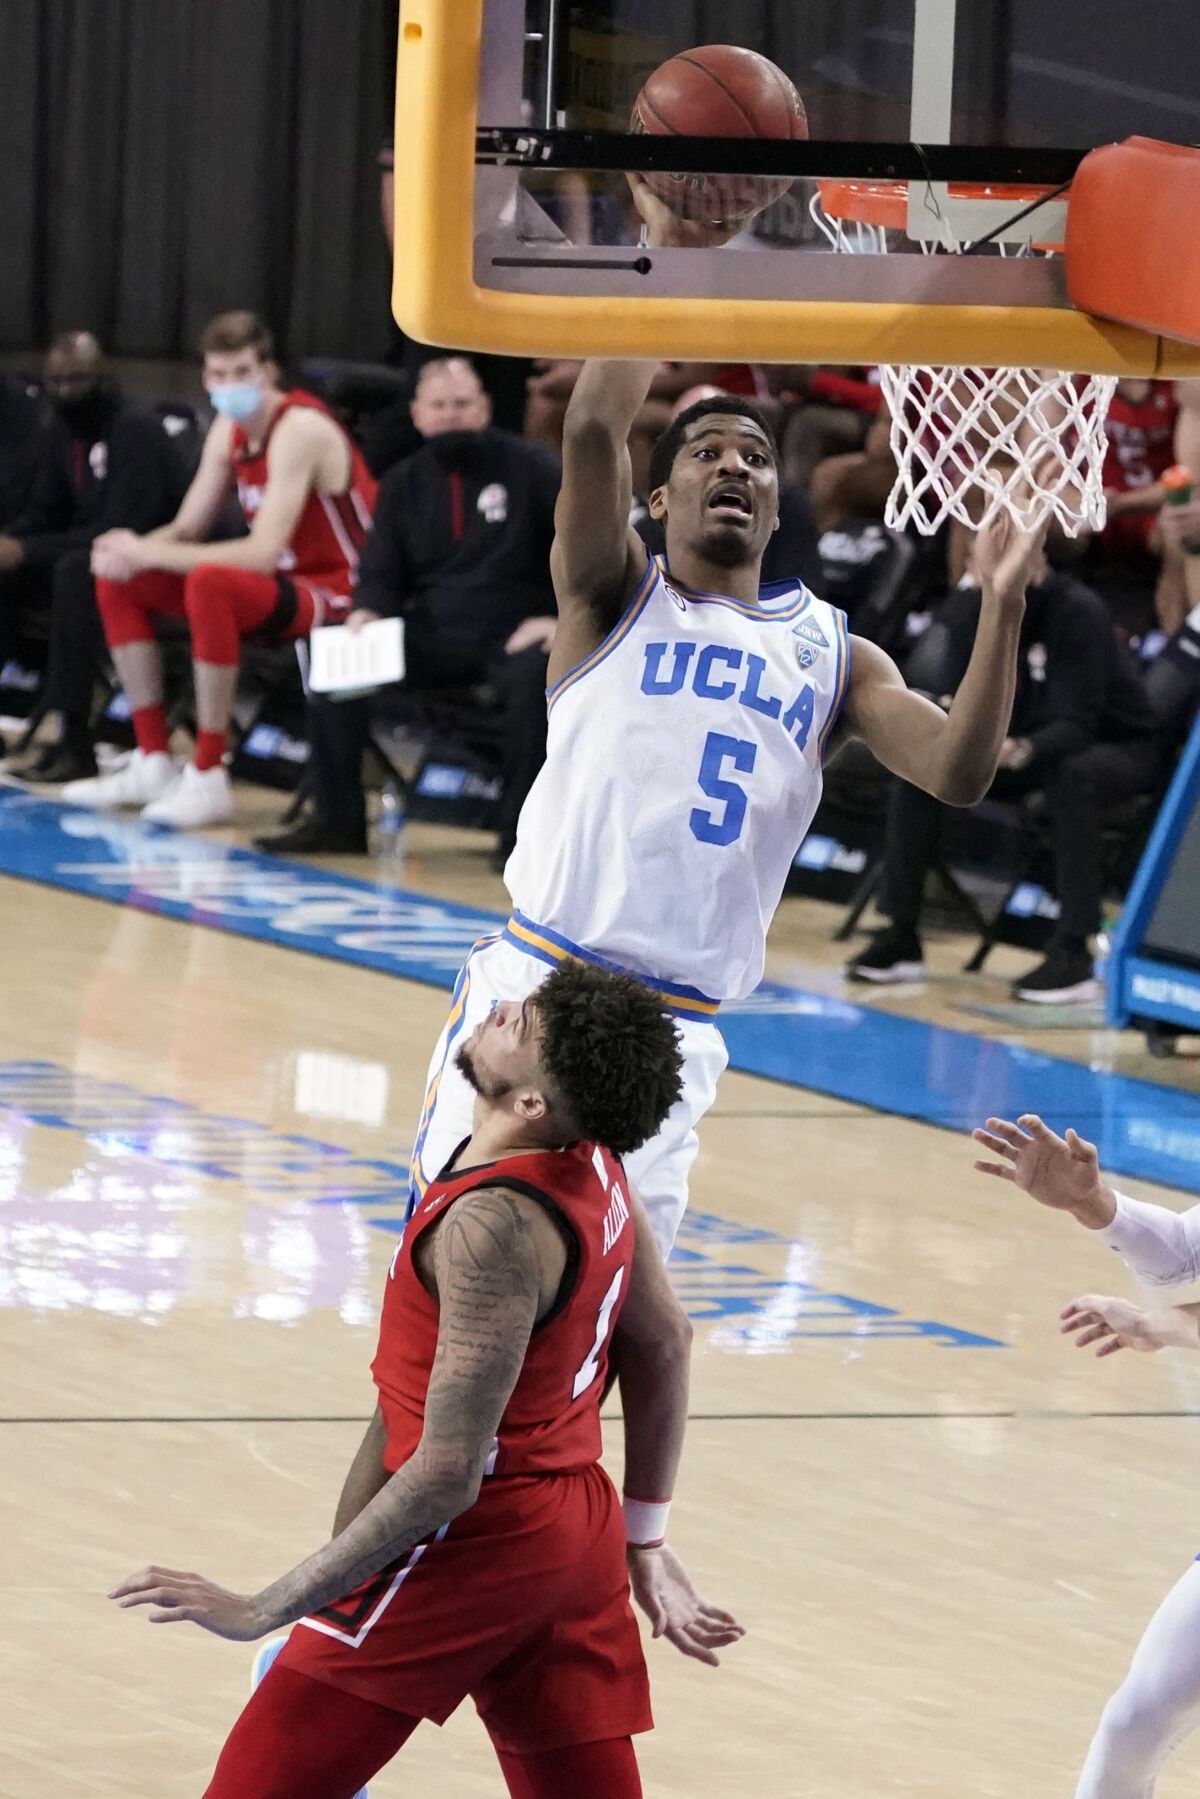 UCLA guard Chris Smith (5) shoots over Utah forward Timmy Allen during the second half of an NCAA college basketball game Thursday, Dec. 31, 2020, in Los Angeles. (AP Photo/Marcio Jose Sanchez)